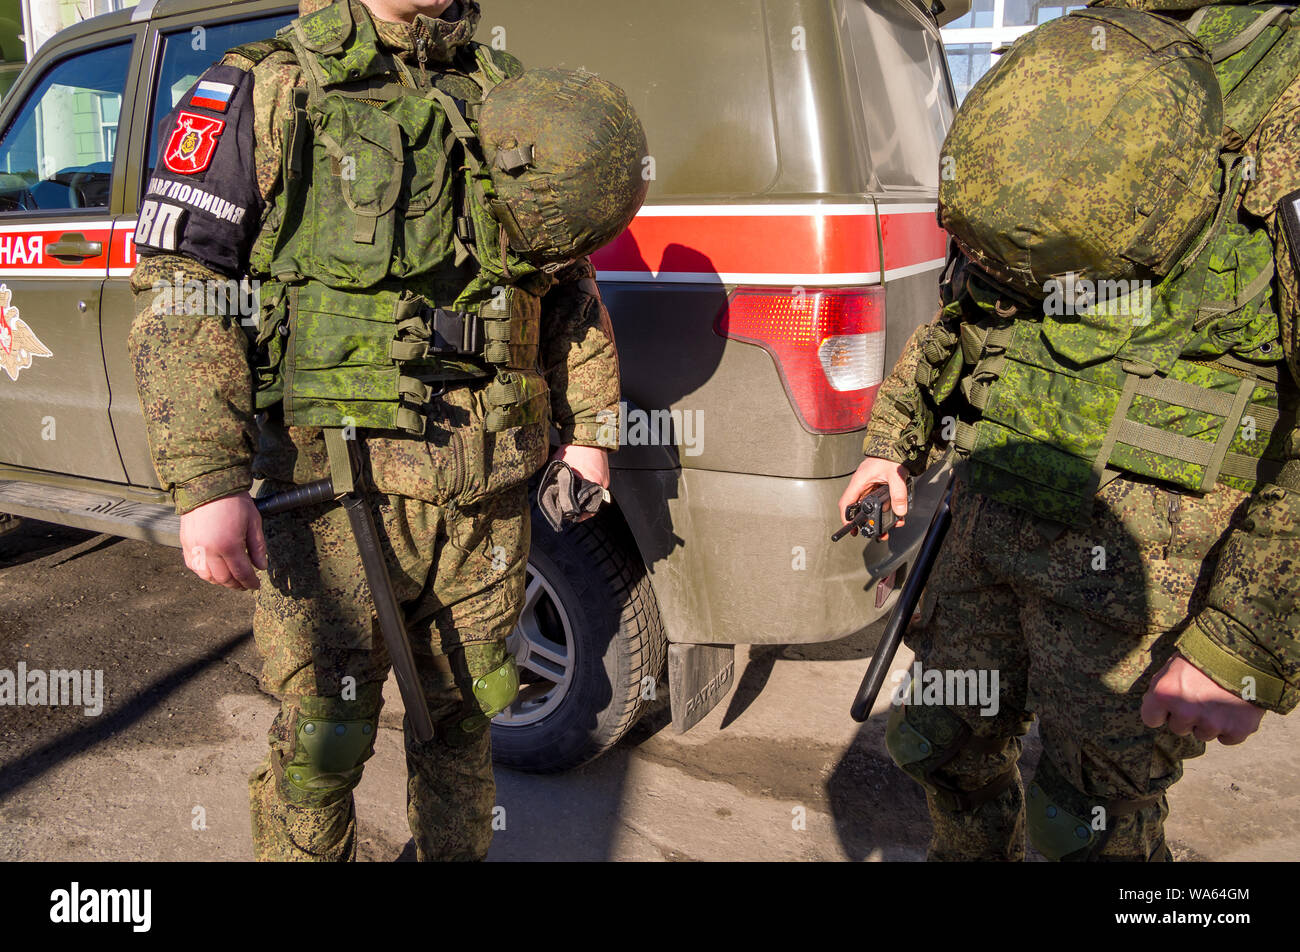 Murmansk, Russia - April 22, 2019: Military police officers stand by the car Stock Photo